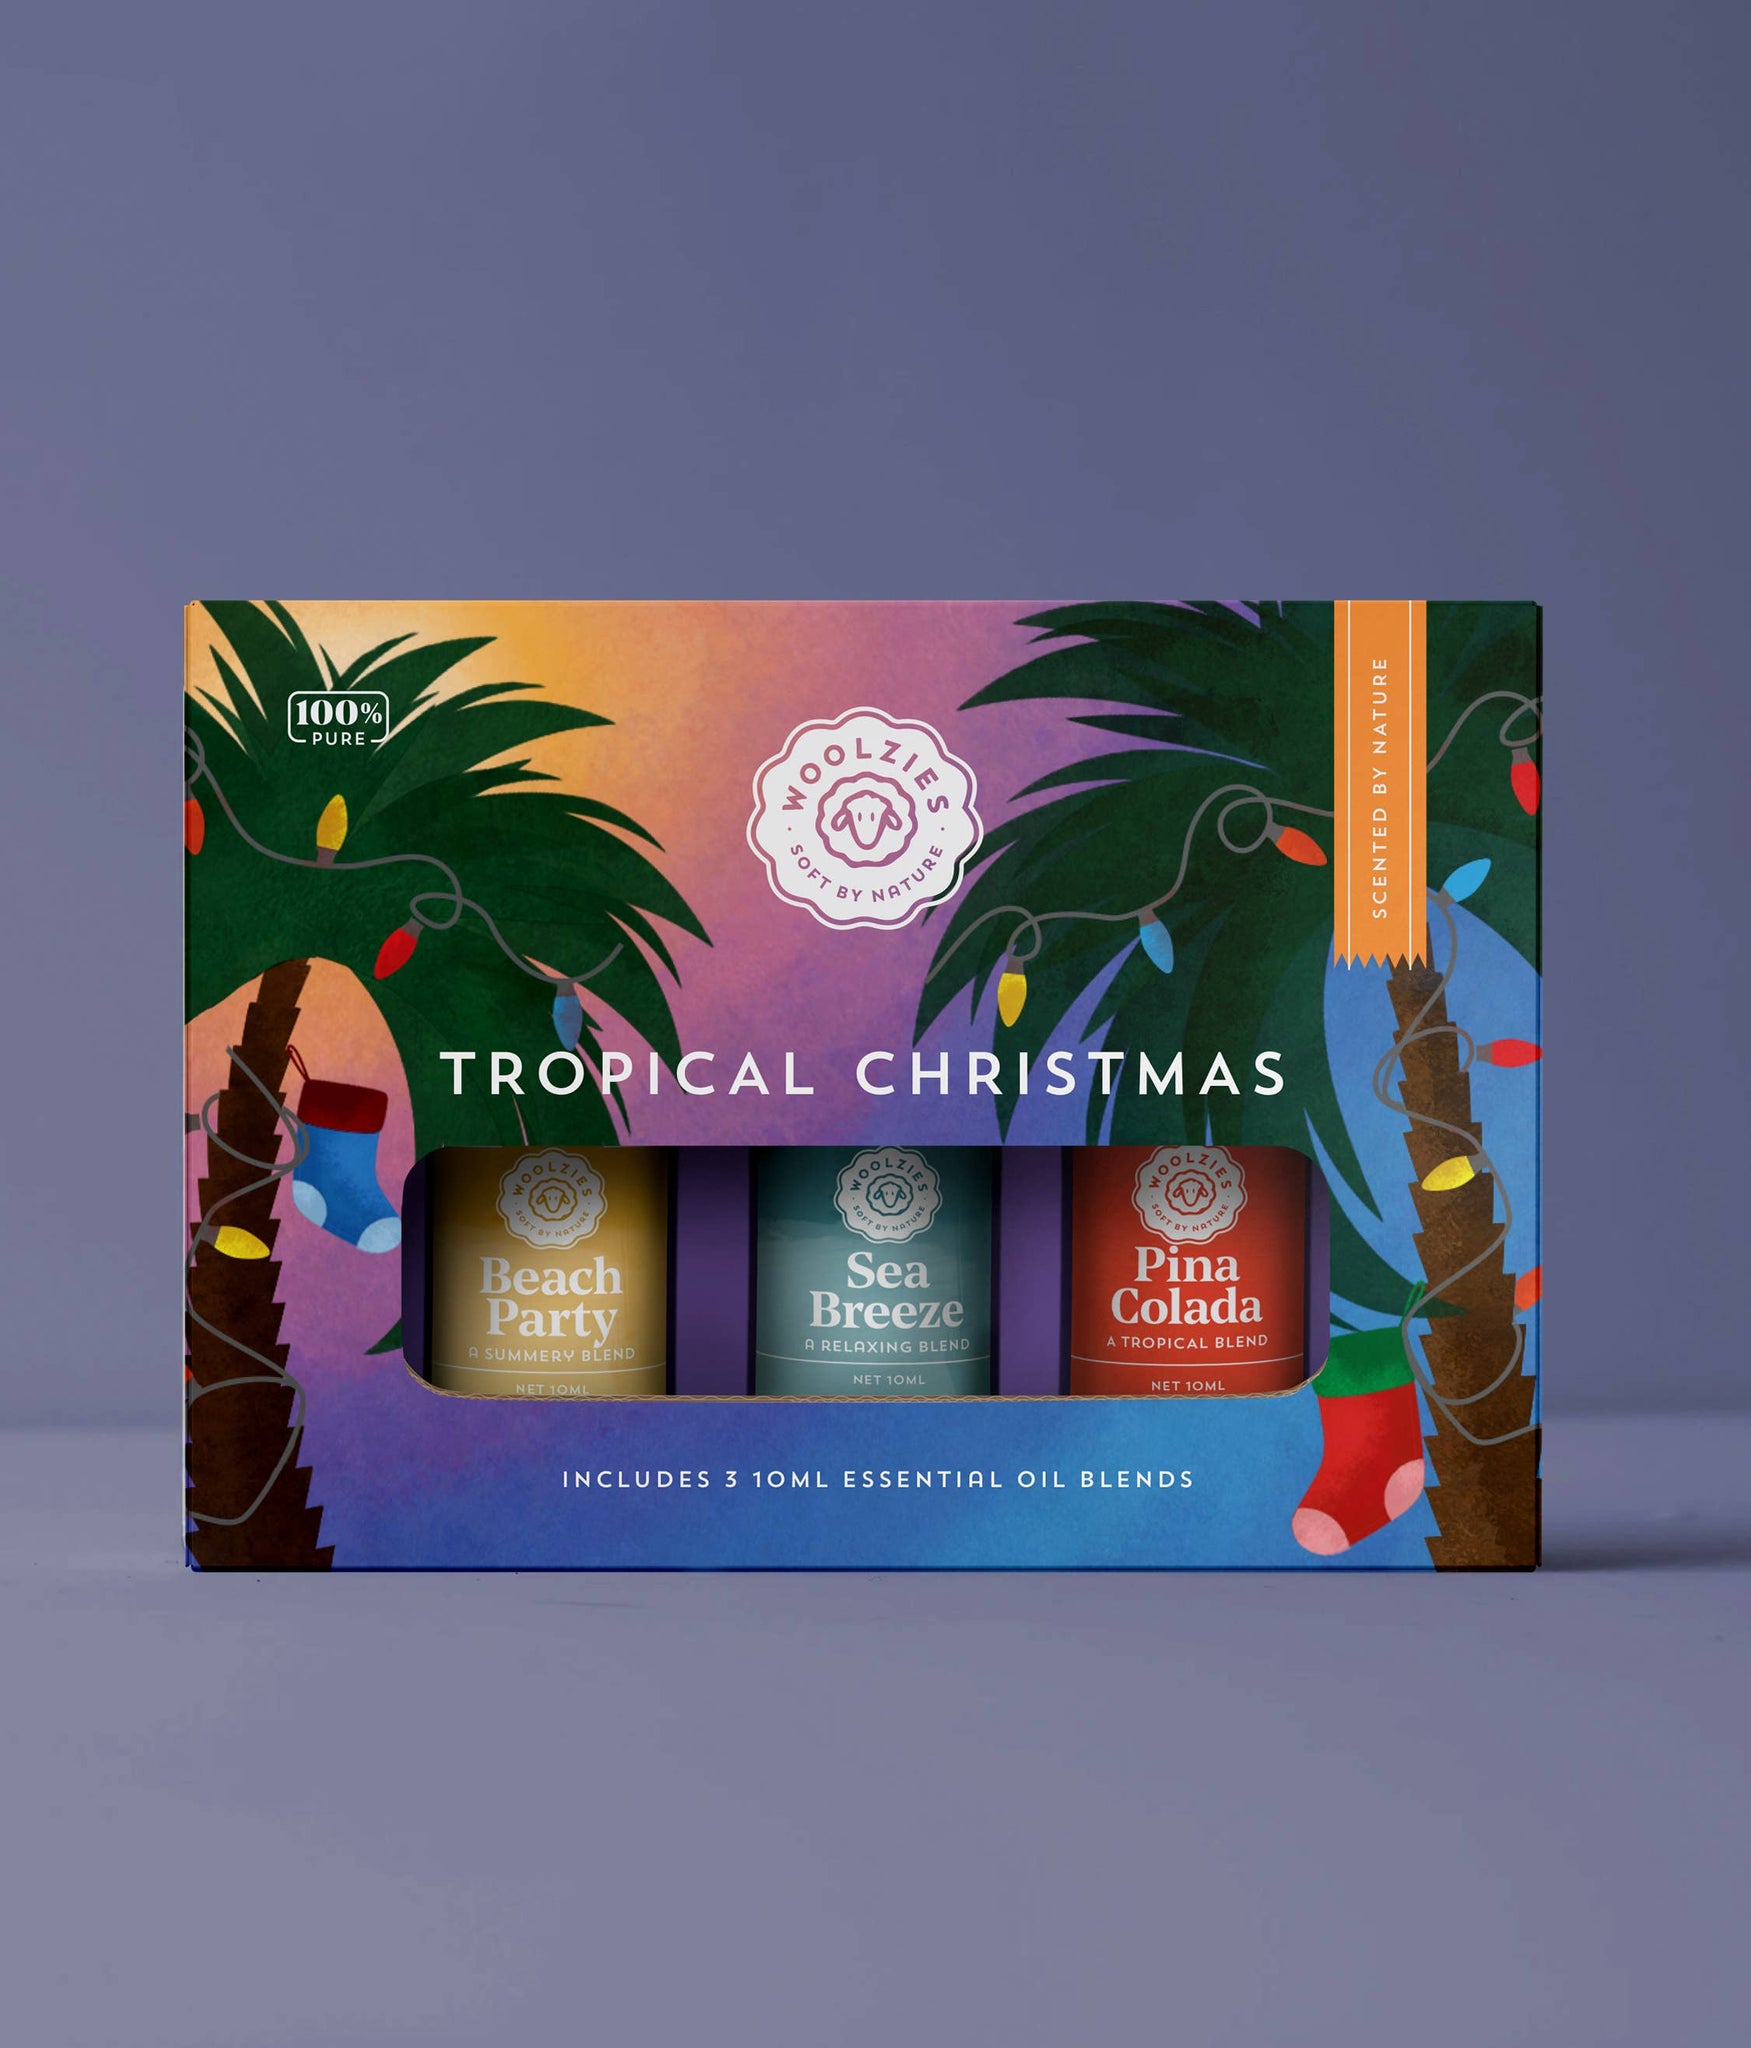 The Tropical Christmas Essential Oil Collection